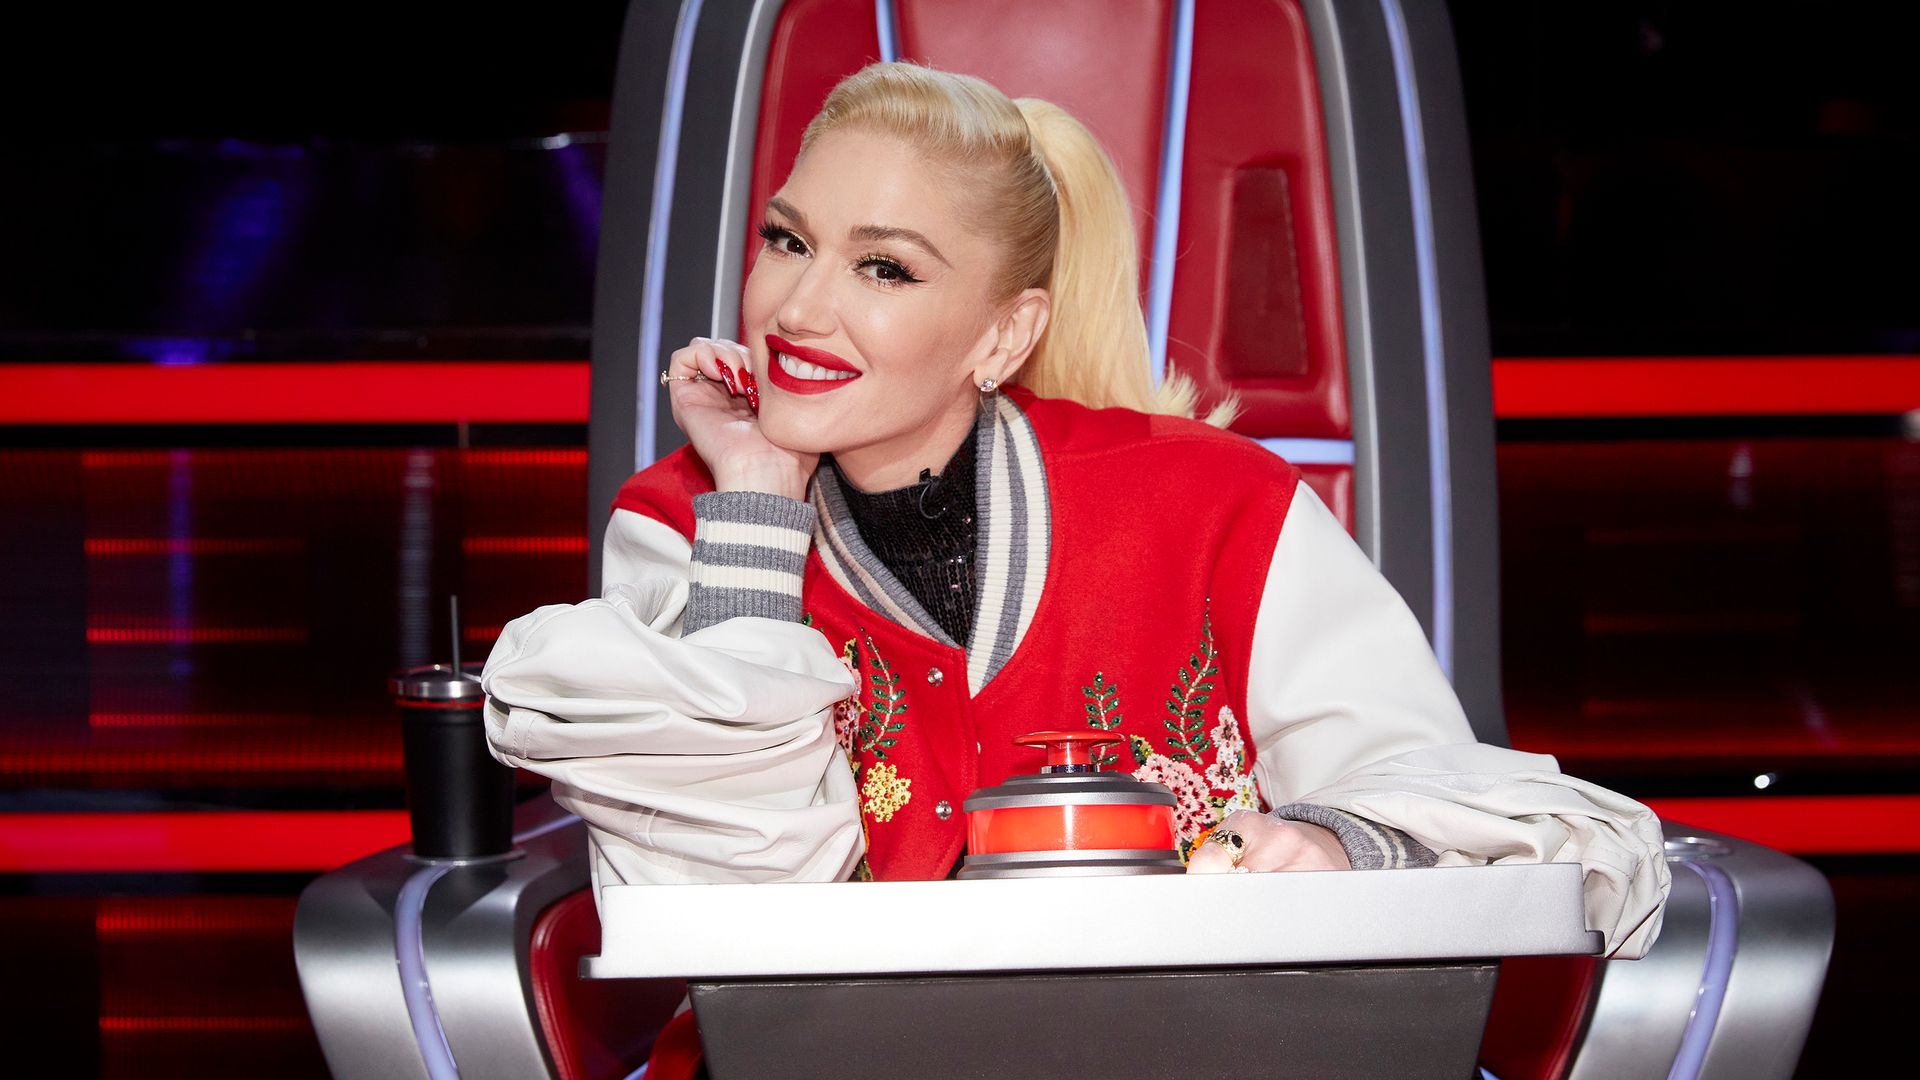 The Voice announces Gwen Stefani and Reba McEntire's return with brand new co-stars — check out the full line-up